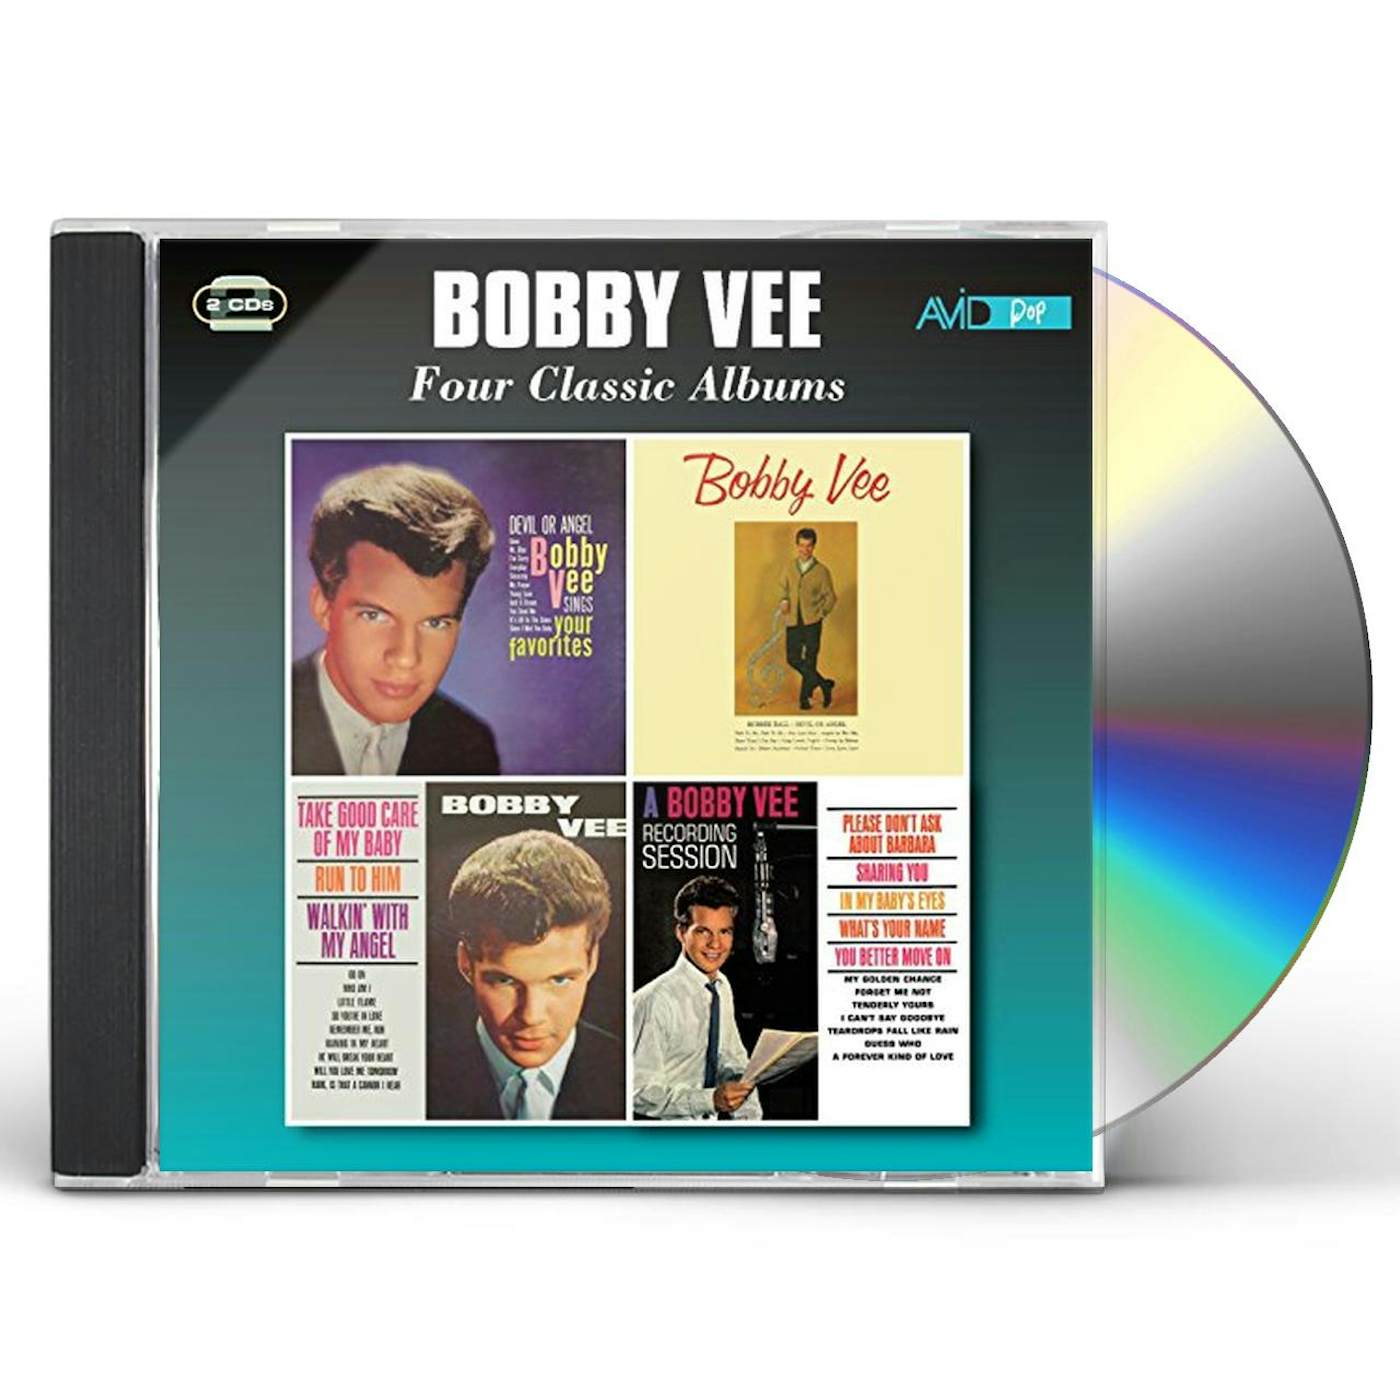 Bobby Vee SINGS YOUR FAVORITES / TAKE GOOD CARE OF MY BABY CD